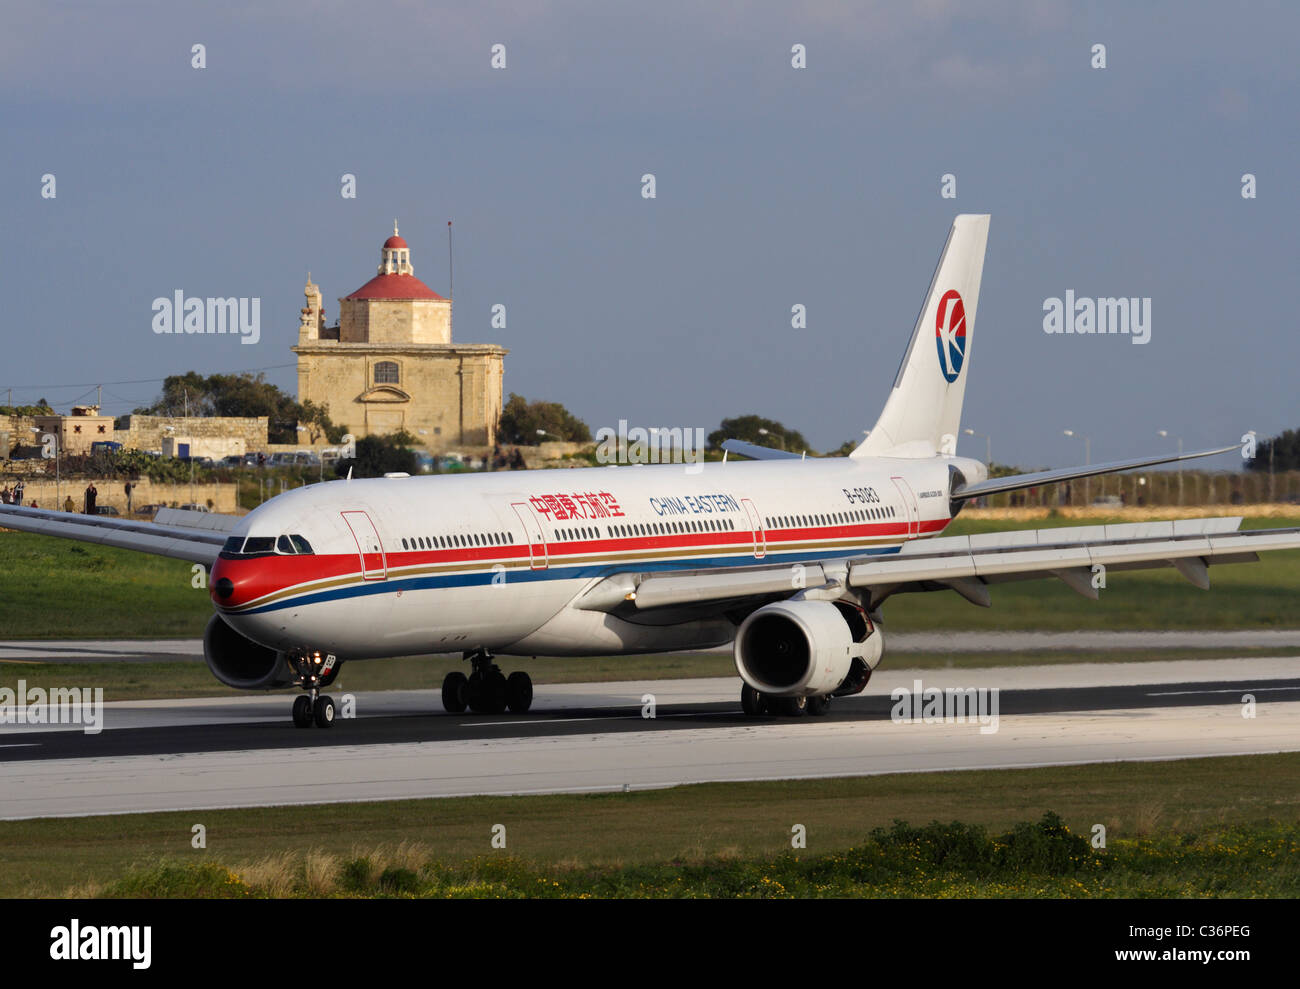 China Eastern Airlines Airbus A330-300 arriving in Malta to repatriate Chinese evacuees from Libya, 27 February 2011 Stock Photo